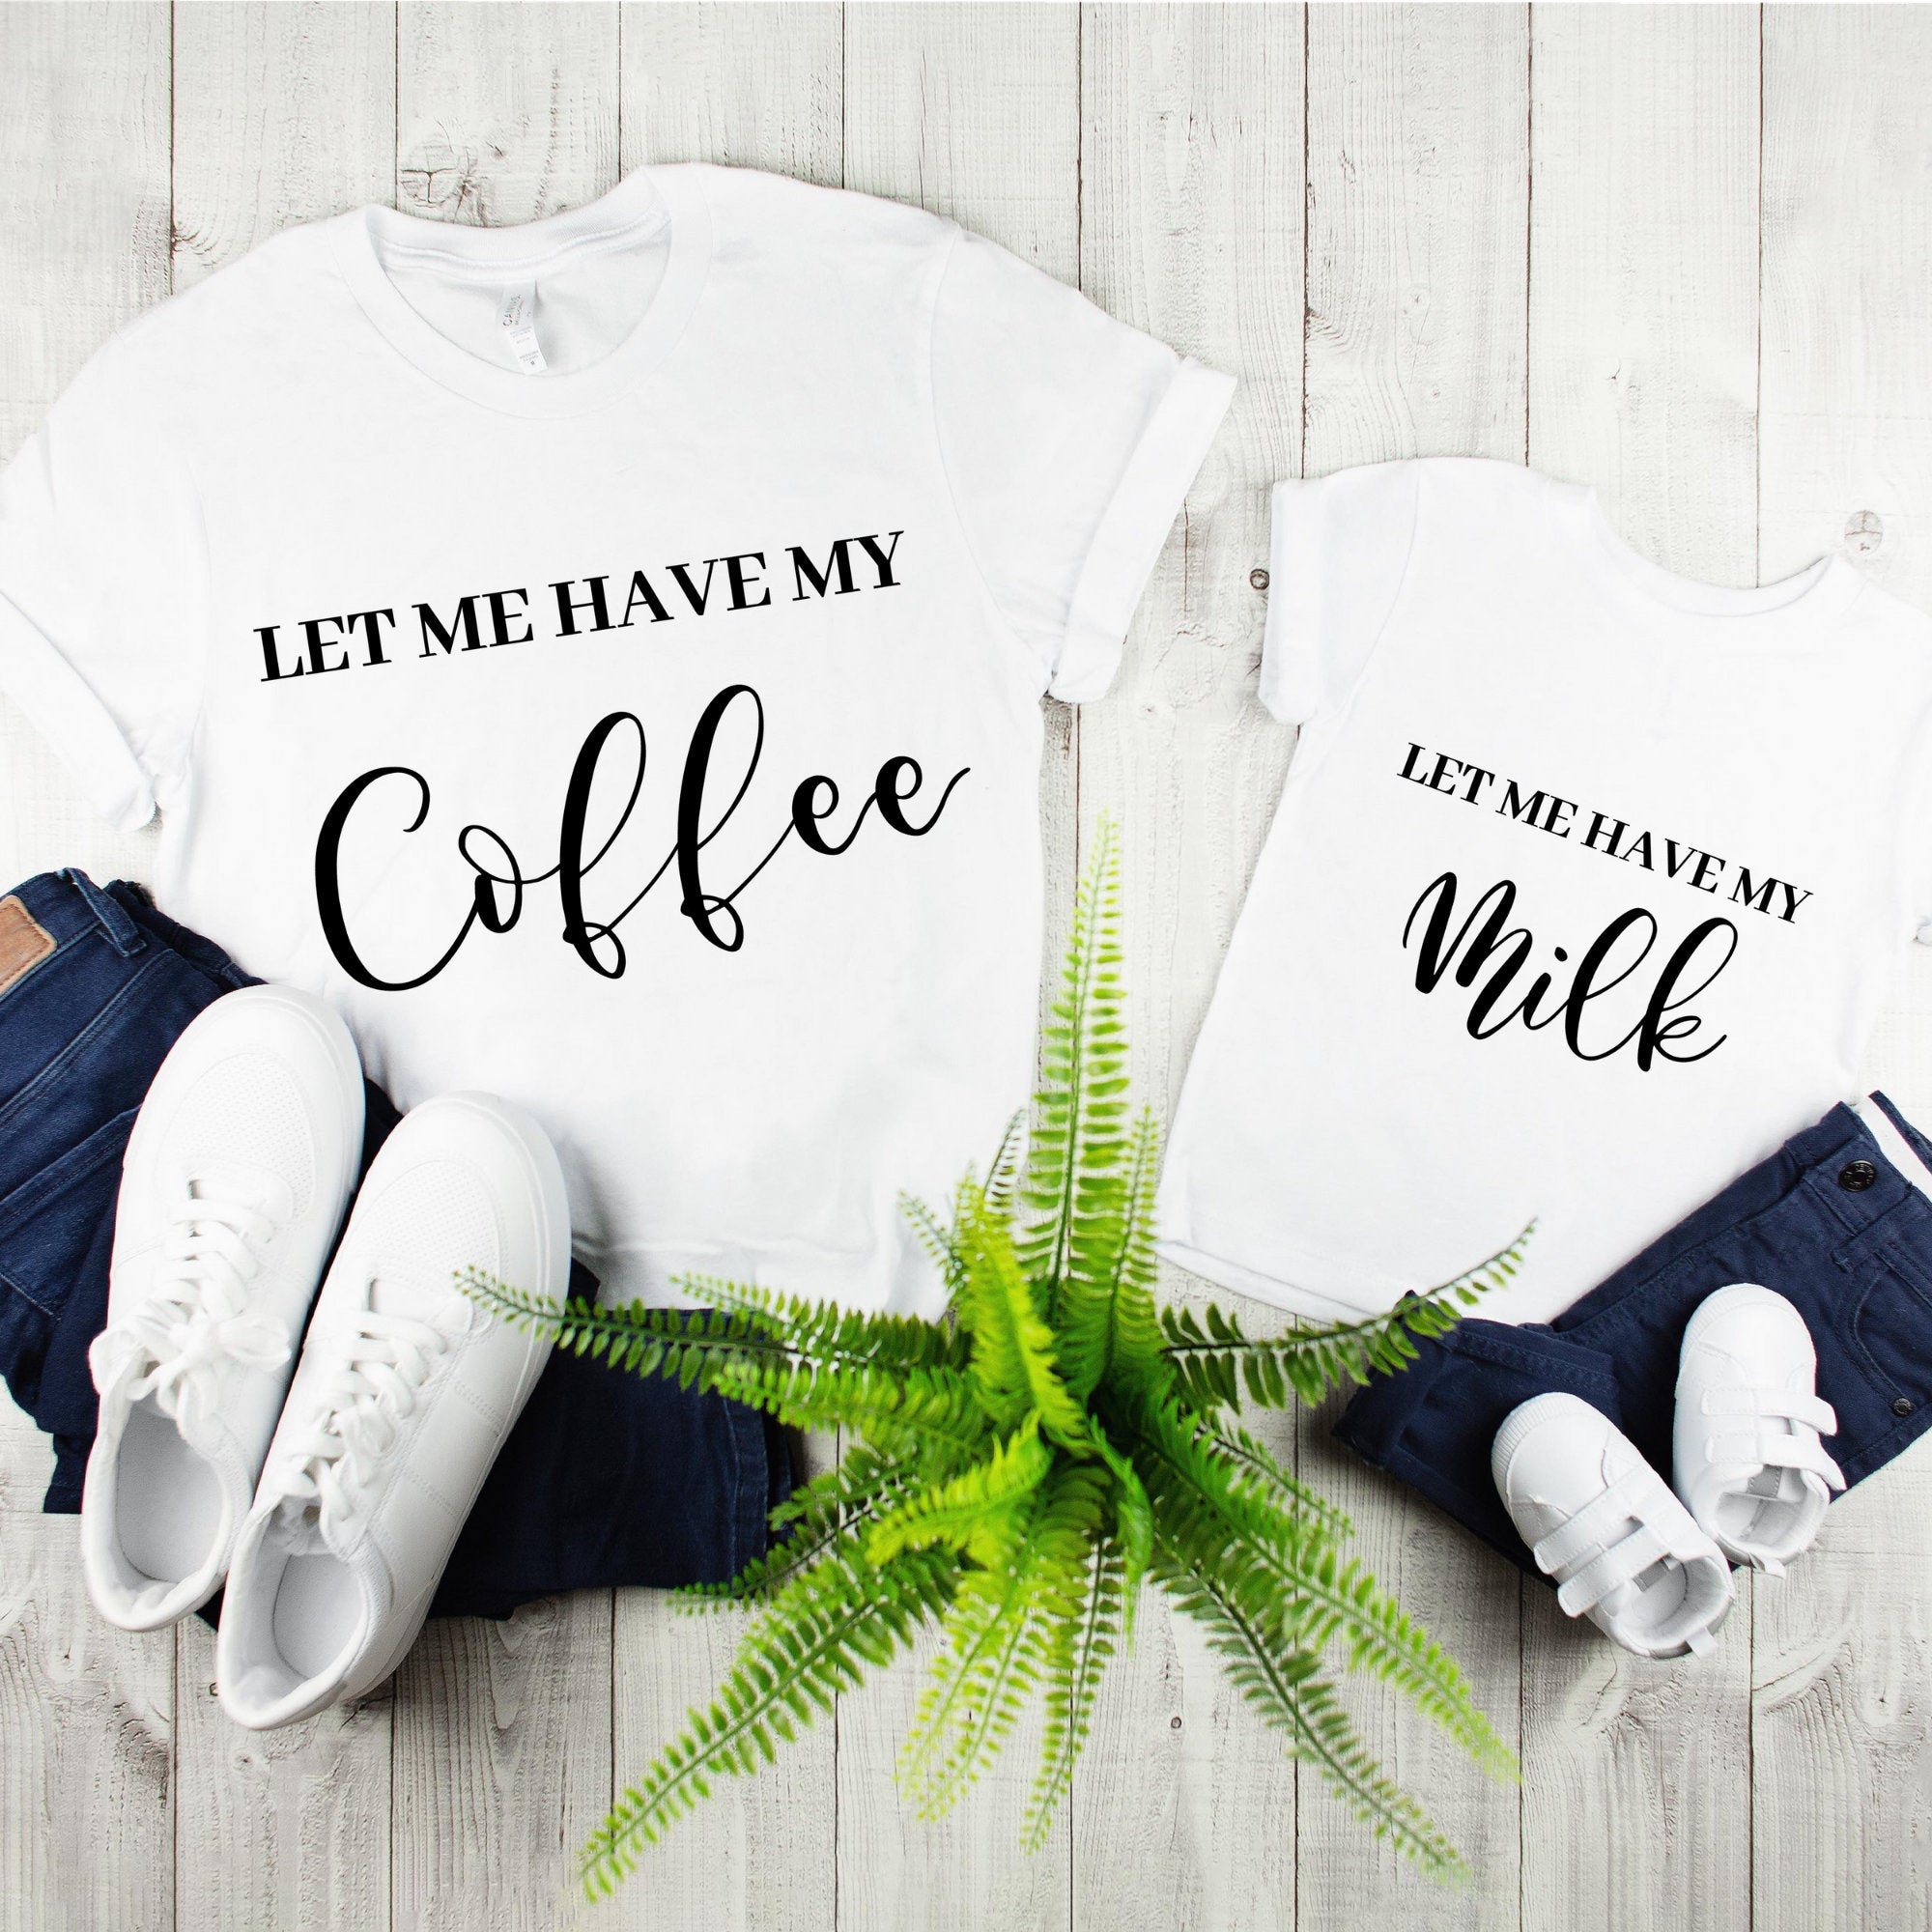 Father and Son Matching Shirts,Daddy And Me Matching,Let Me Have My Coffee-Let Me Have My Milk Tee,Gift For Dad And Son, Dad And Son Shirts - MamaBuzz Creations